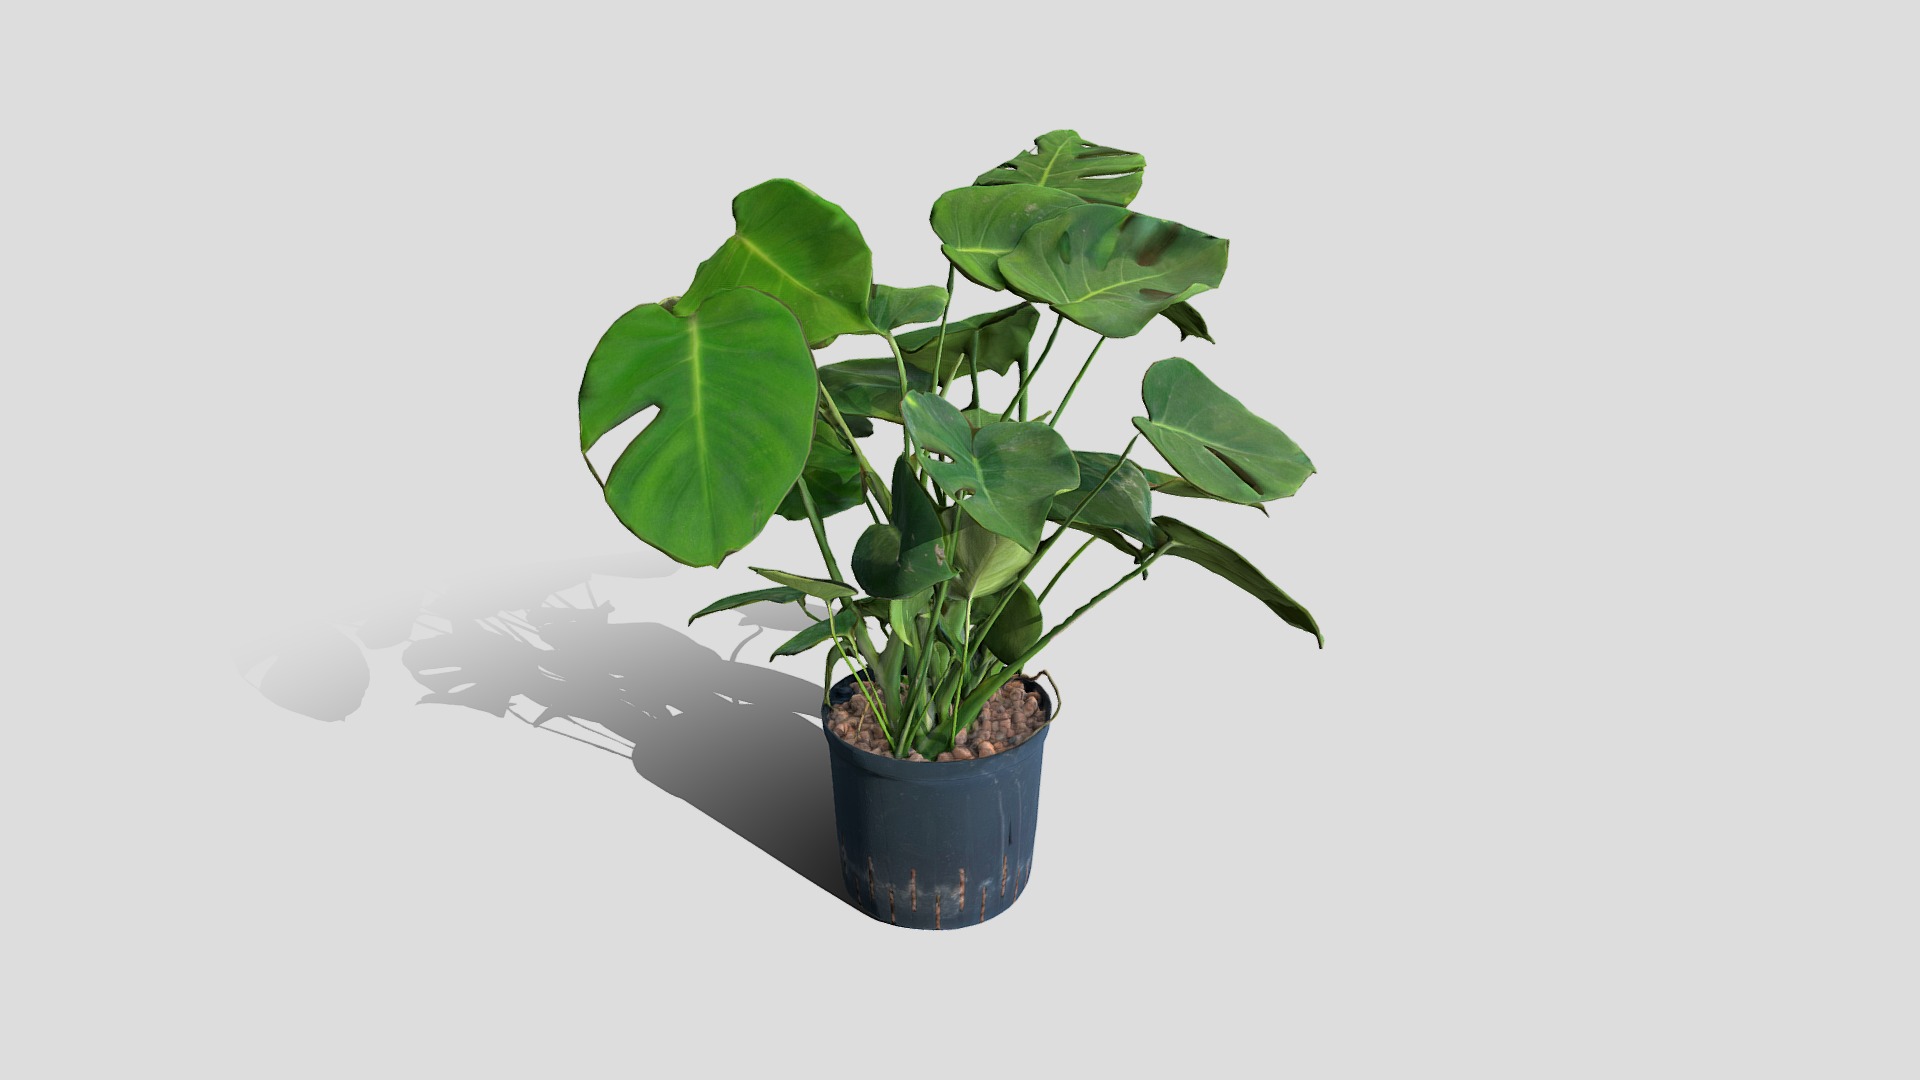 3D model 000024_Philodendron 2 - This is a 3D model of the 000024_Philodendron 2. The 3D model is about a potted plant with a plant in it.